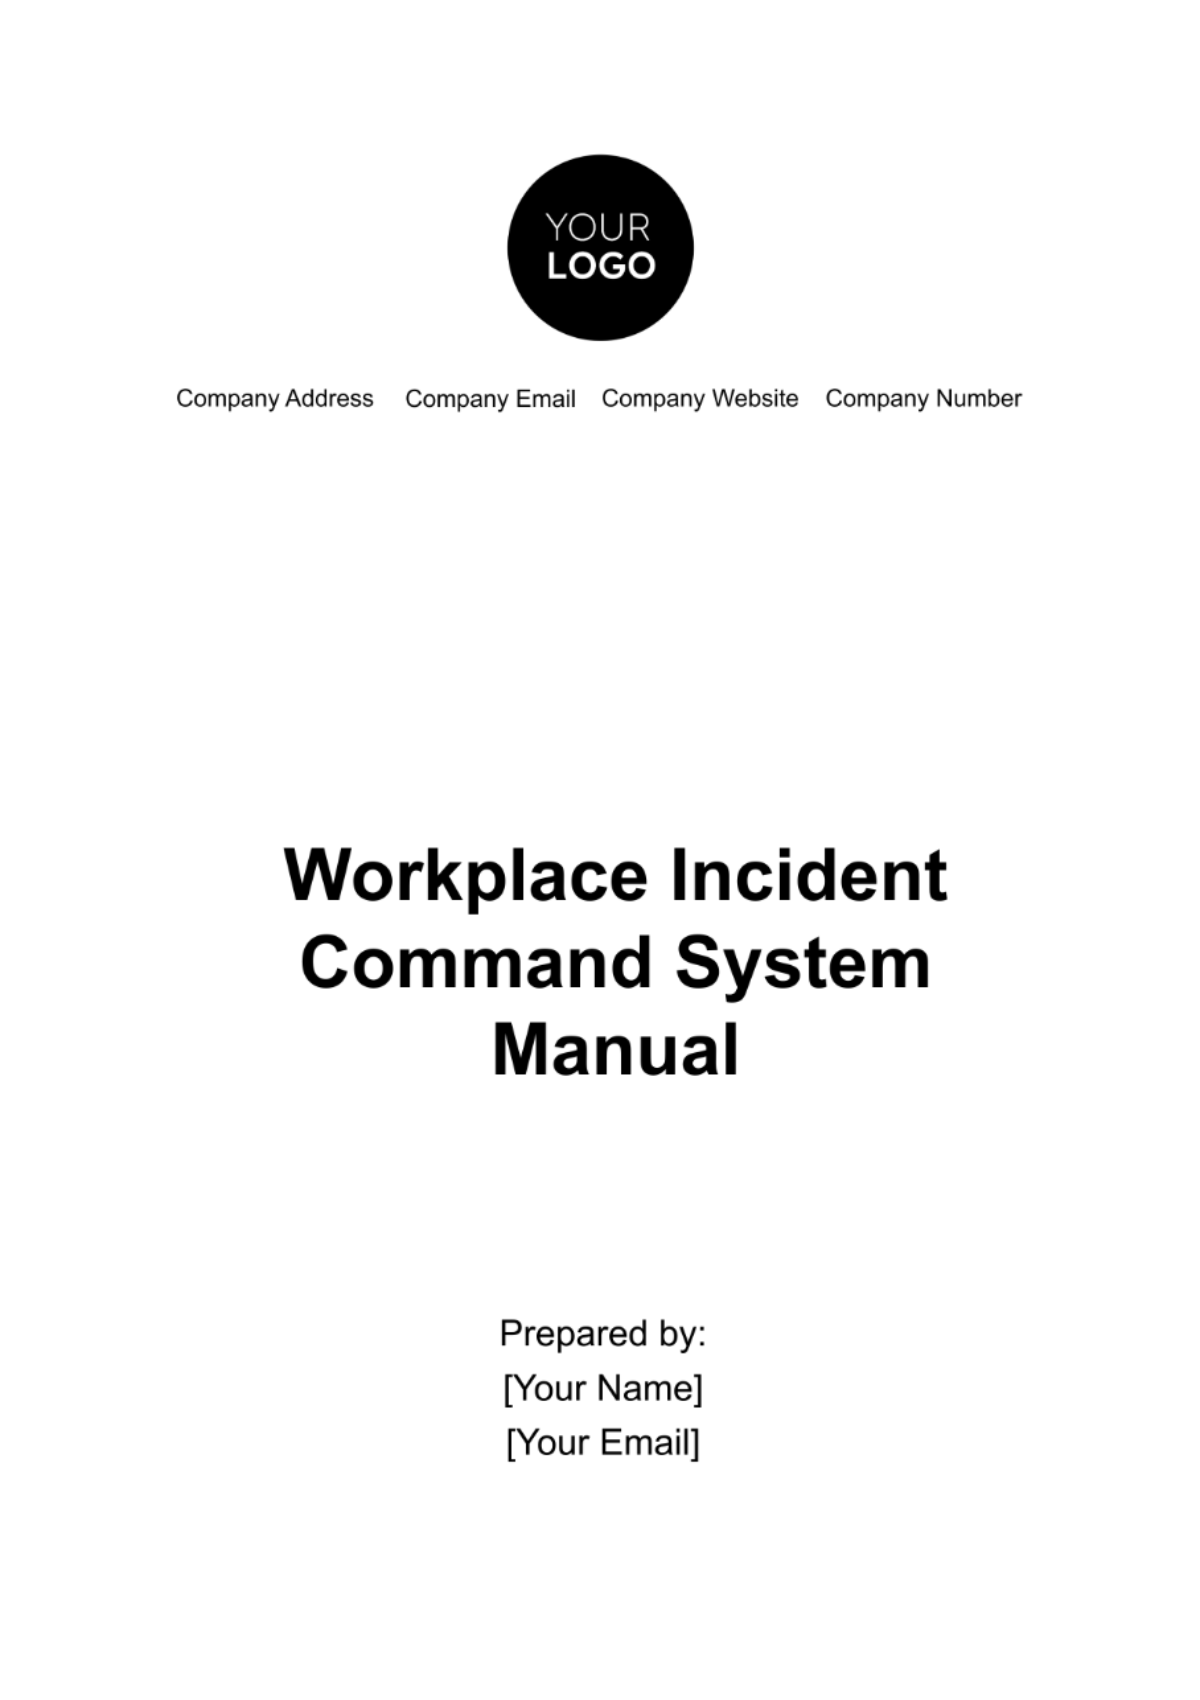 Free Workplace Incident Command System Manual Template